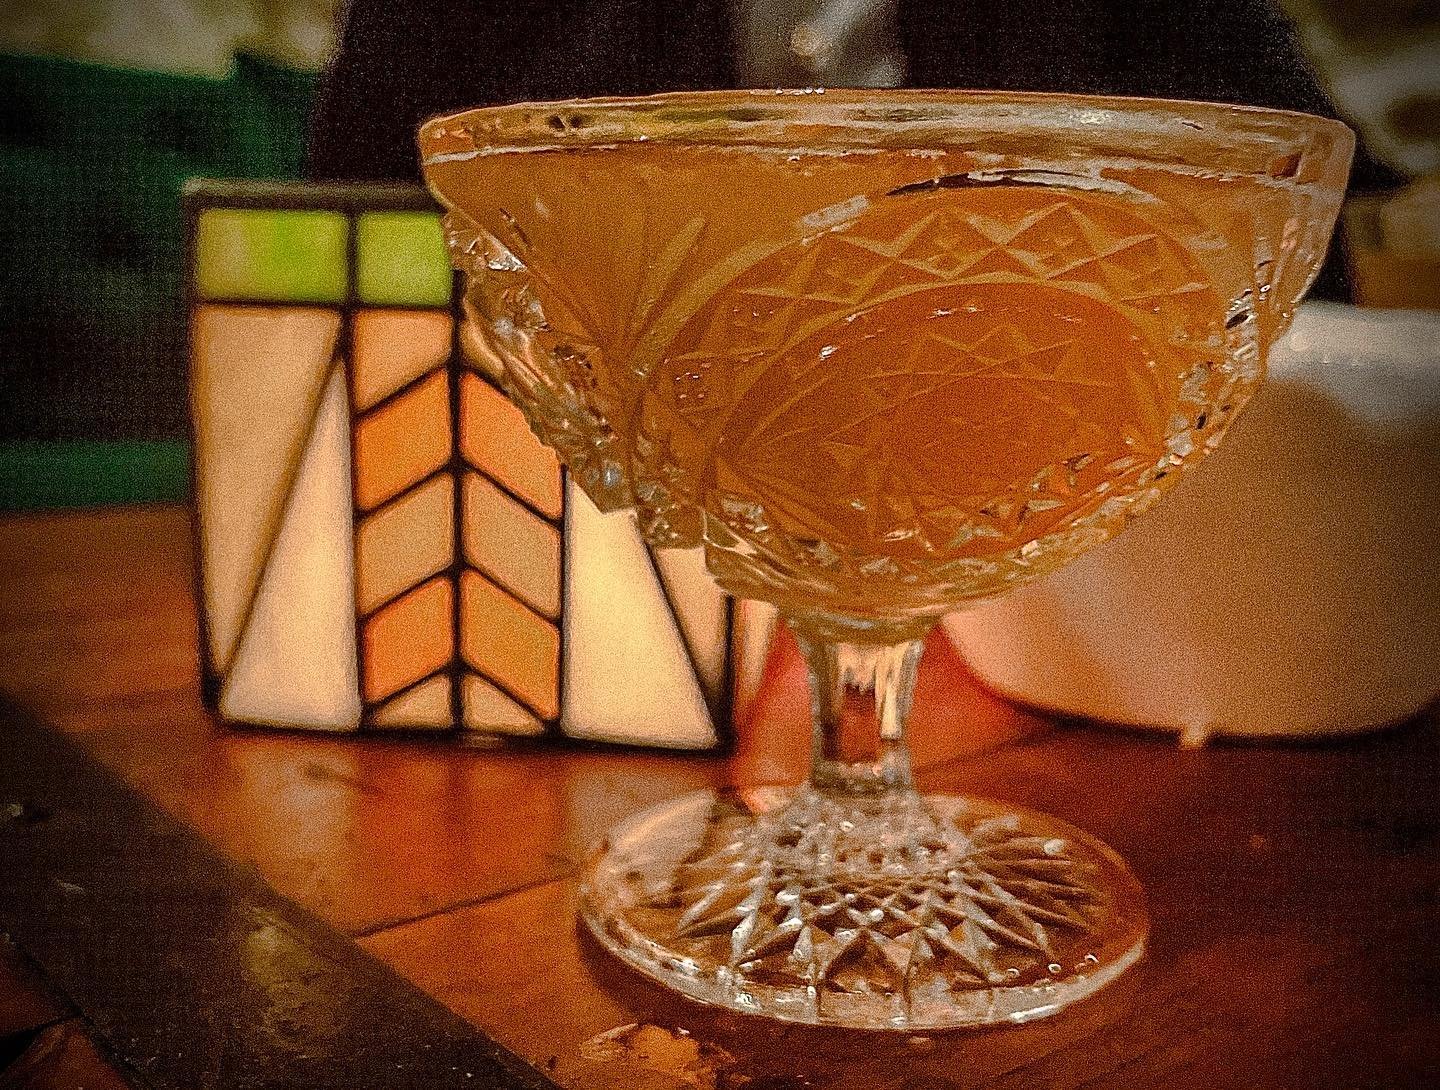 Sunday Sip Series!

If you missed trivia, you missed this baby but she might be back soon!

-:- Grand Sidecar -:-
Congac
Grand Marnier
Triplesec 
Lemon
Shake and strain 🧊

#sunday #sundayfunday #drinks #cocktails #speakeasy #bar #openbar #norwaymain